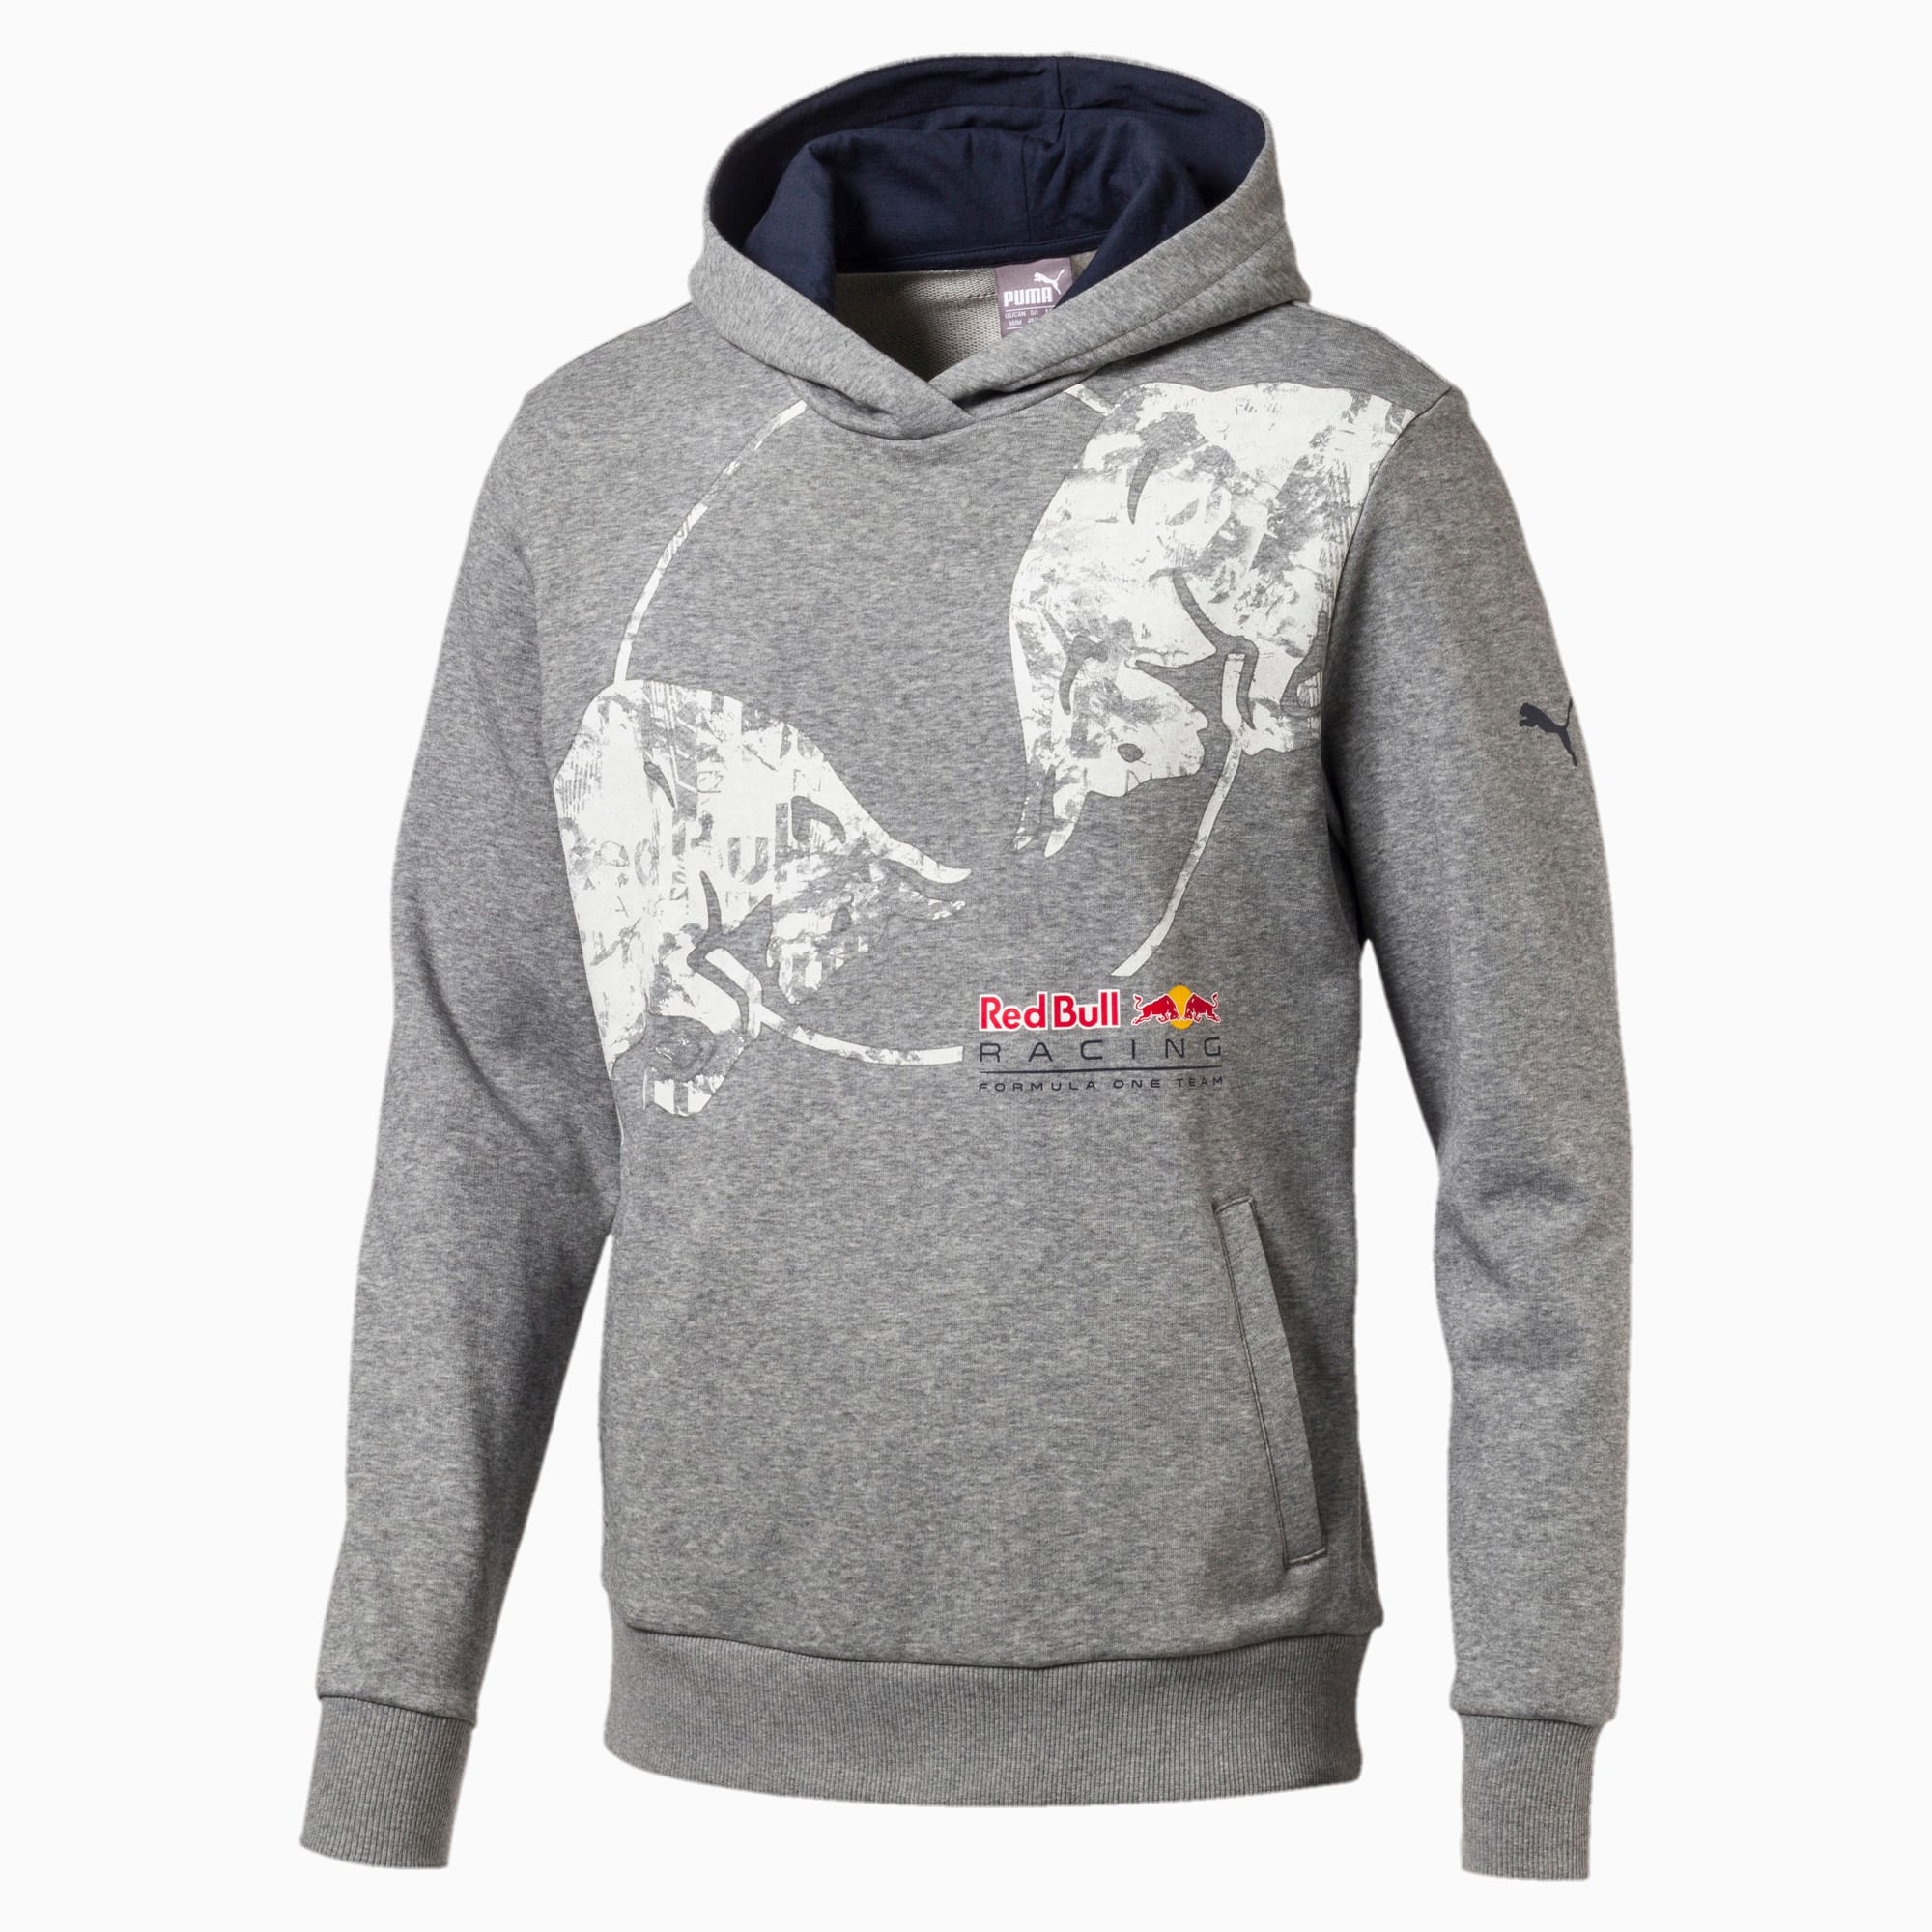 Red Bull Racing Lifestyle Men's Graphic 